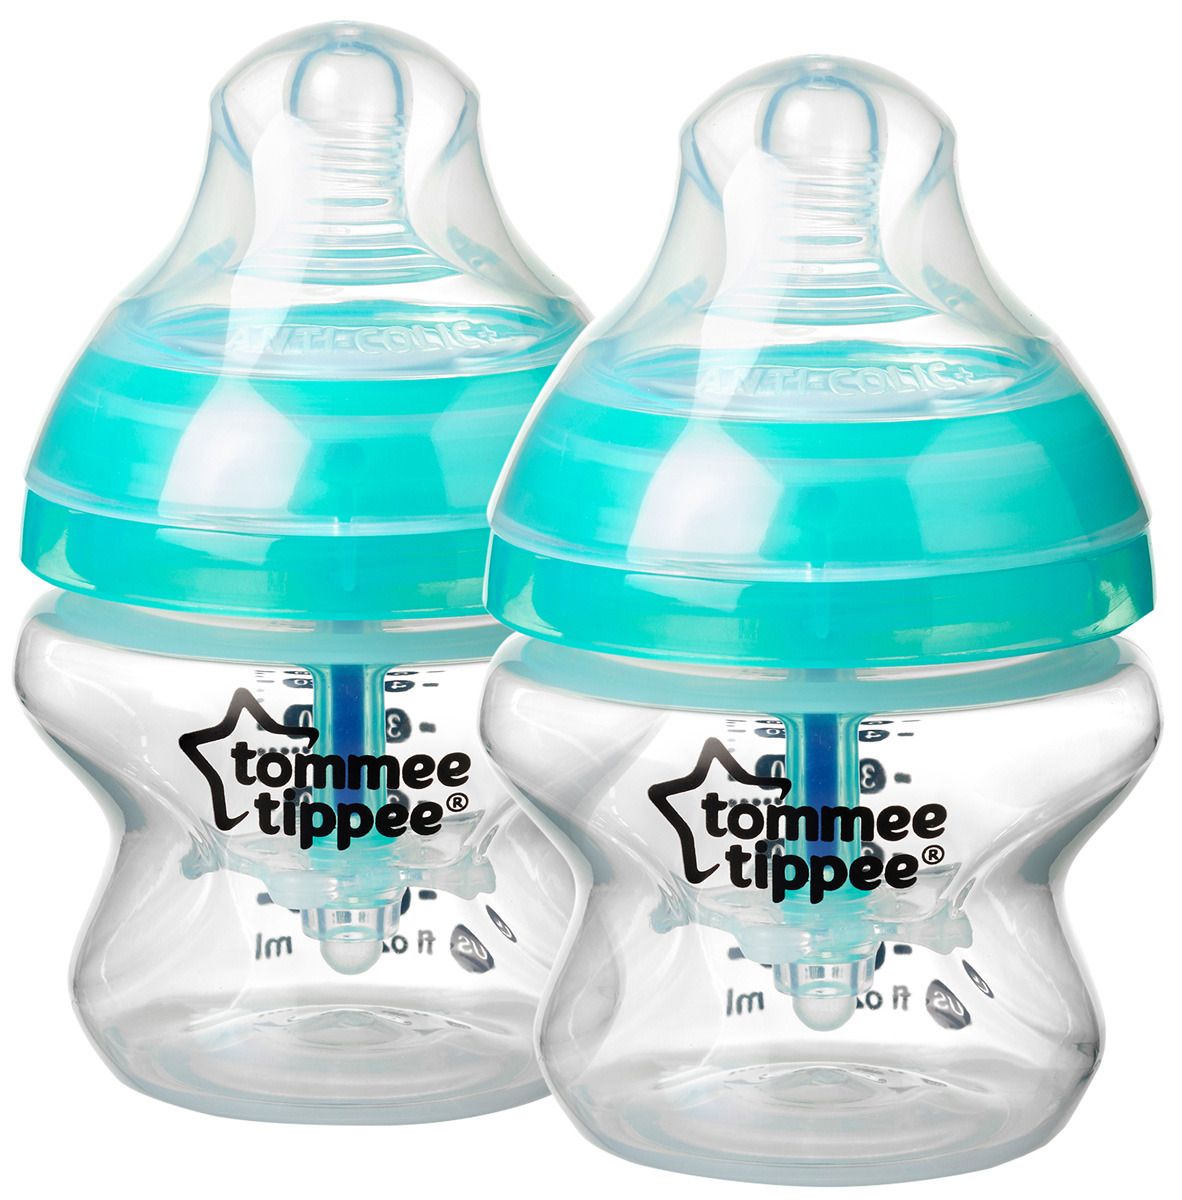    Tommee Tippee Advanced       , 42260275, 150 , 2 